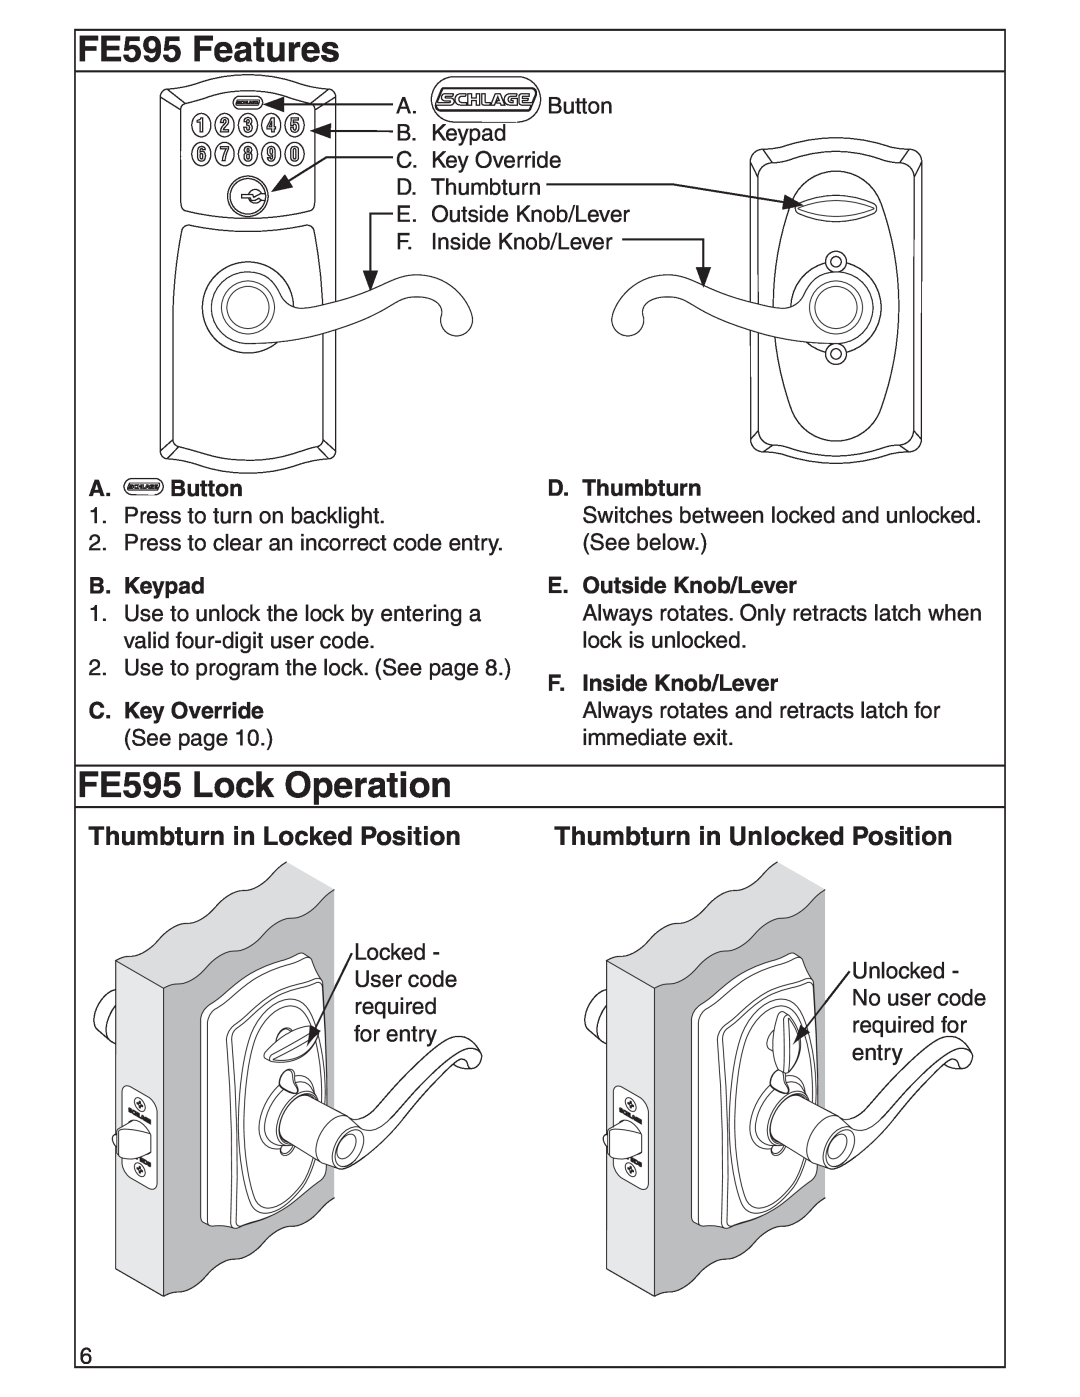 Schlage FE595 Features, FE595 Lock Operation, Thumbturn in Locked Position, Thumbturn in Unlocked Position, D.Thumbturn 